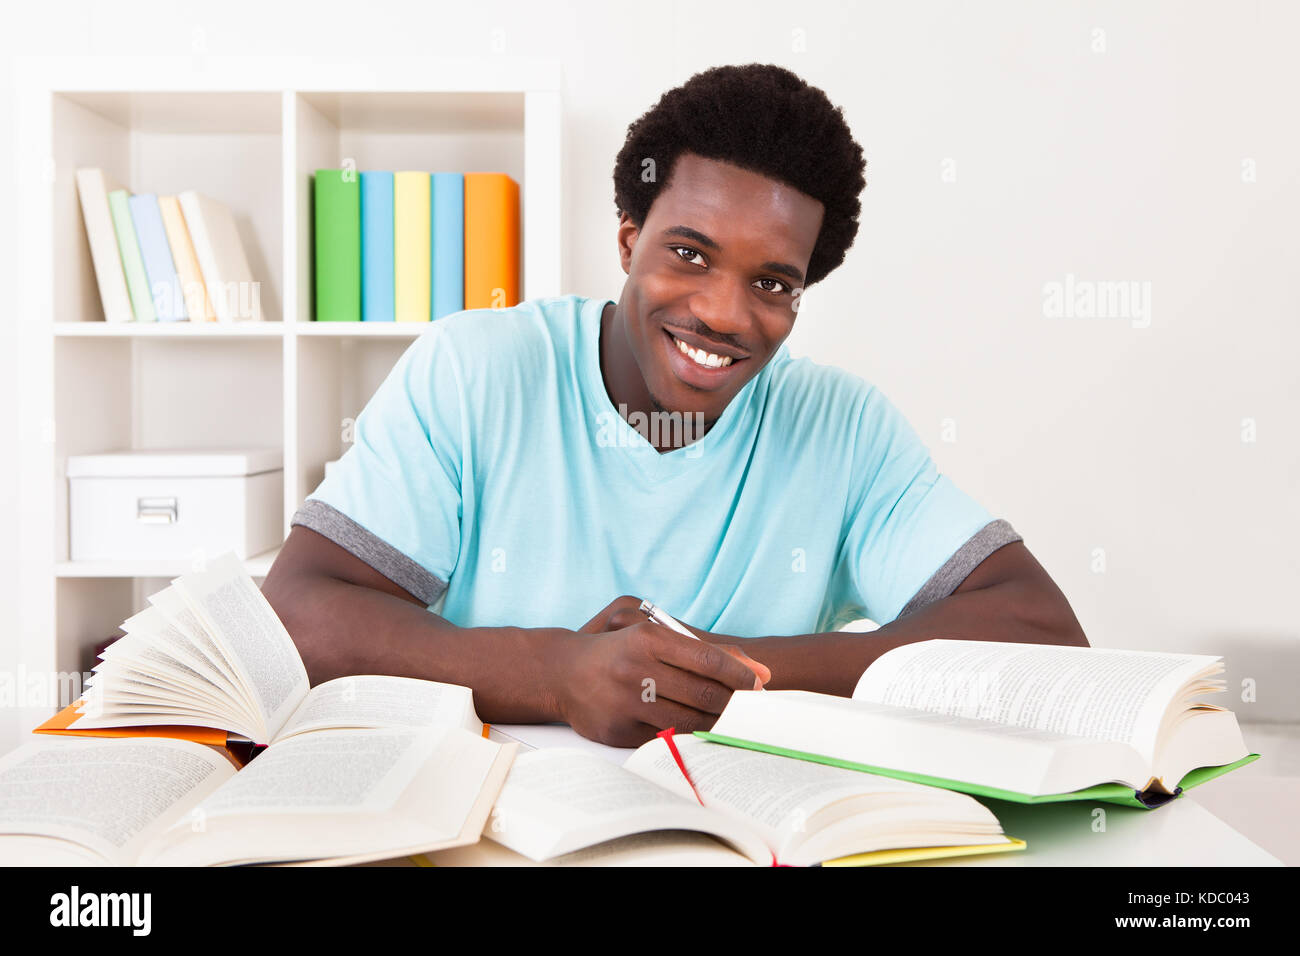 Young African Man Studying At Home With A Lot Of Books Stock Photo